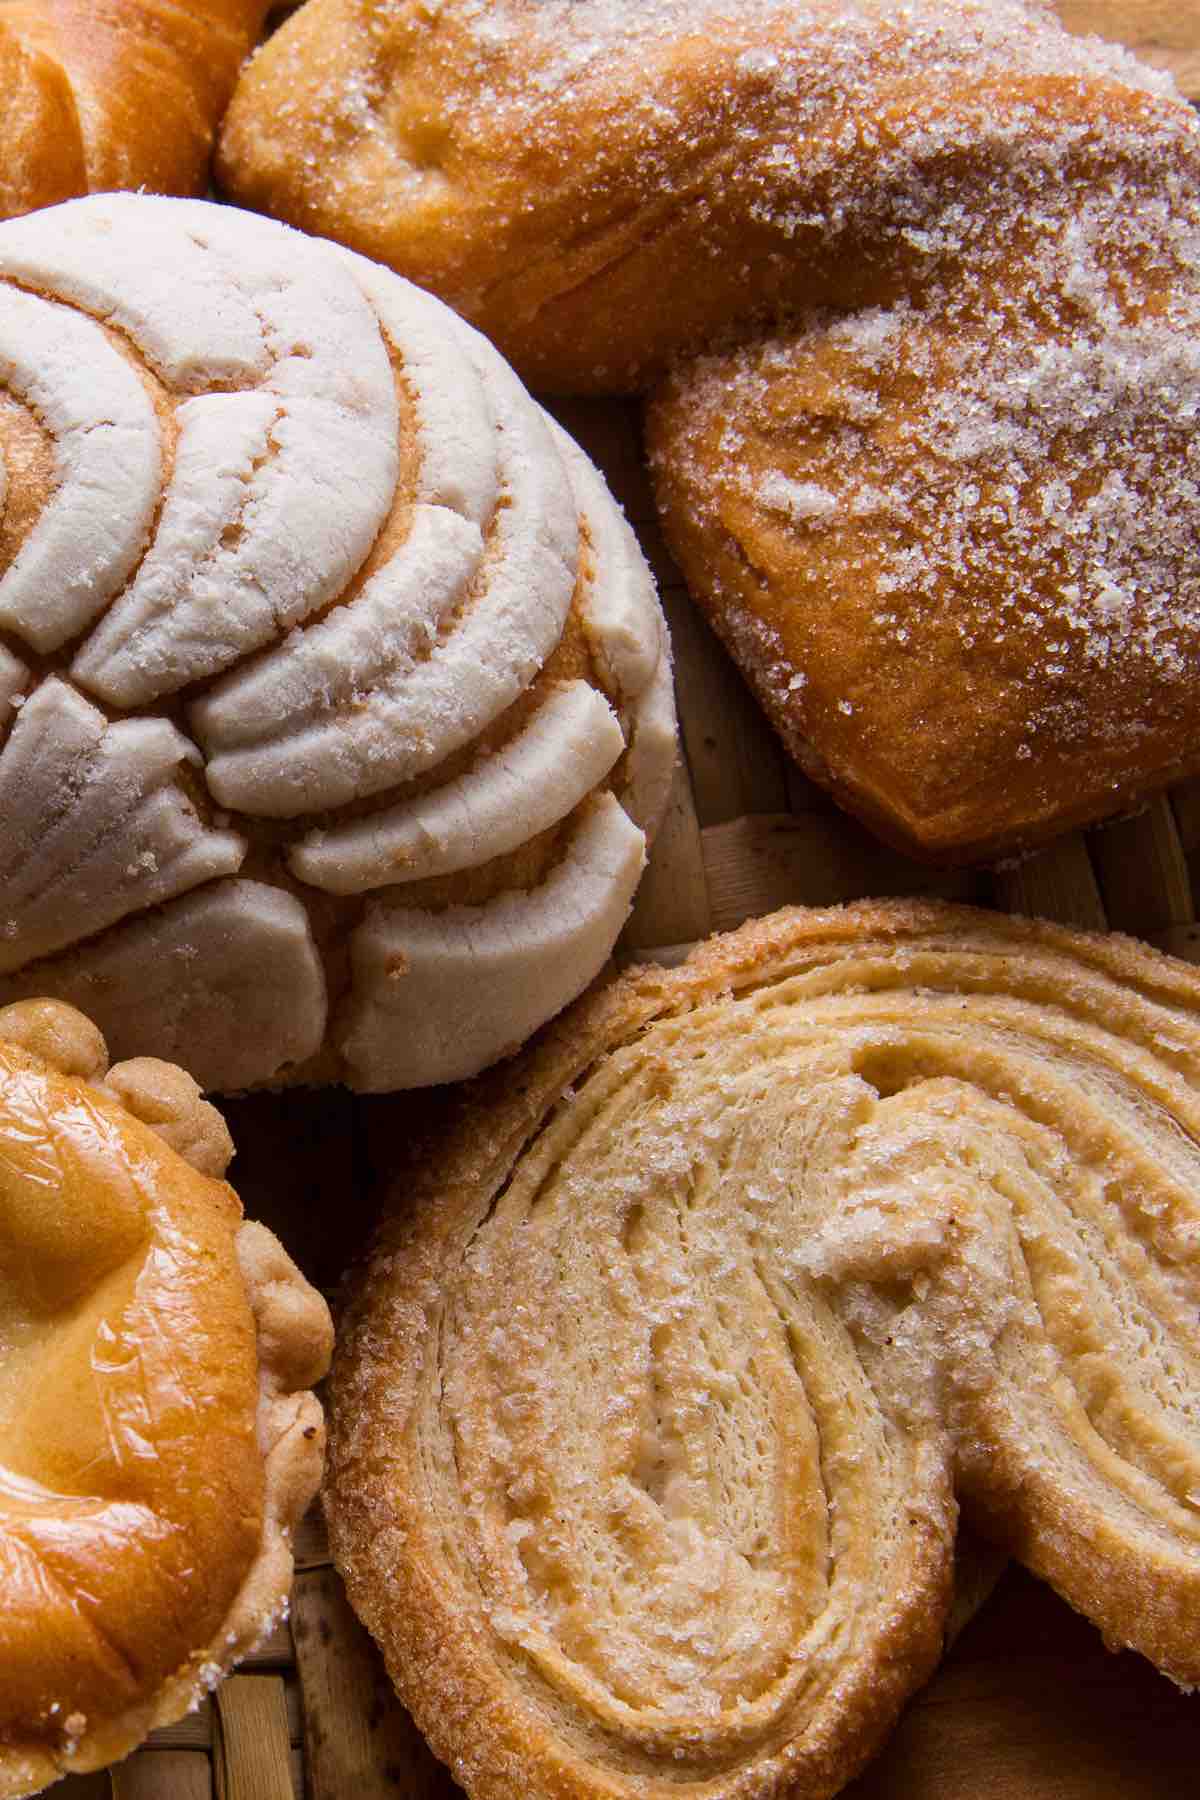 It’s no secret that Mexican food is some of the most delicious in the world. Authentic Mexican breads are the perfect way to get your carb fix. Head to your nearest panadería (bakery) or make some at home today! Here are a few of our favorite Mexican Bread Recipes.